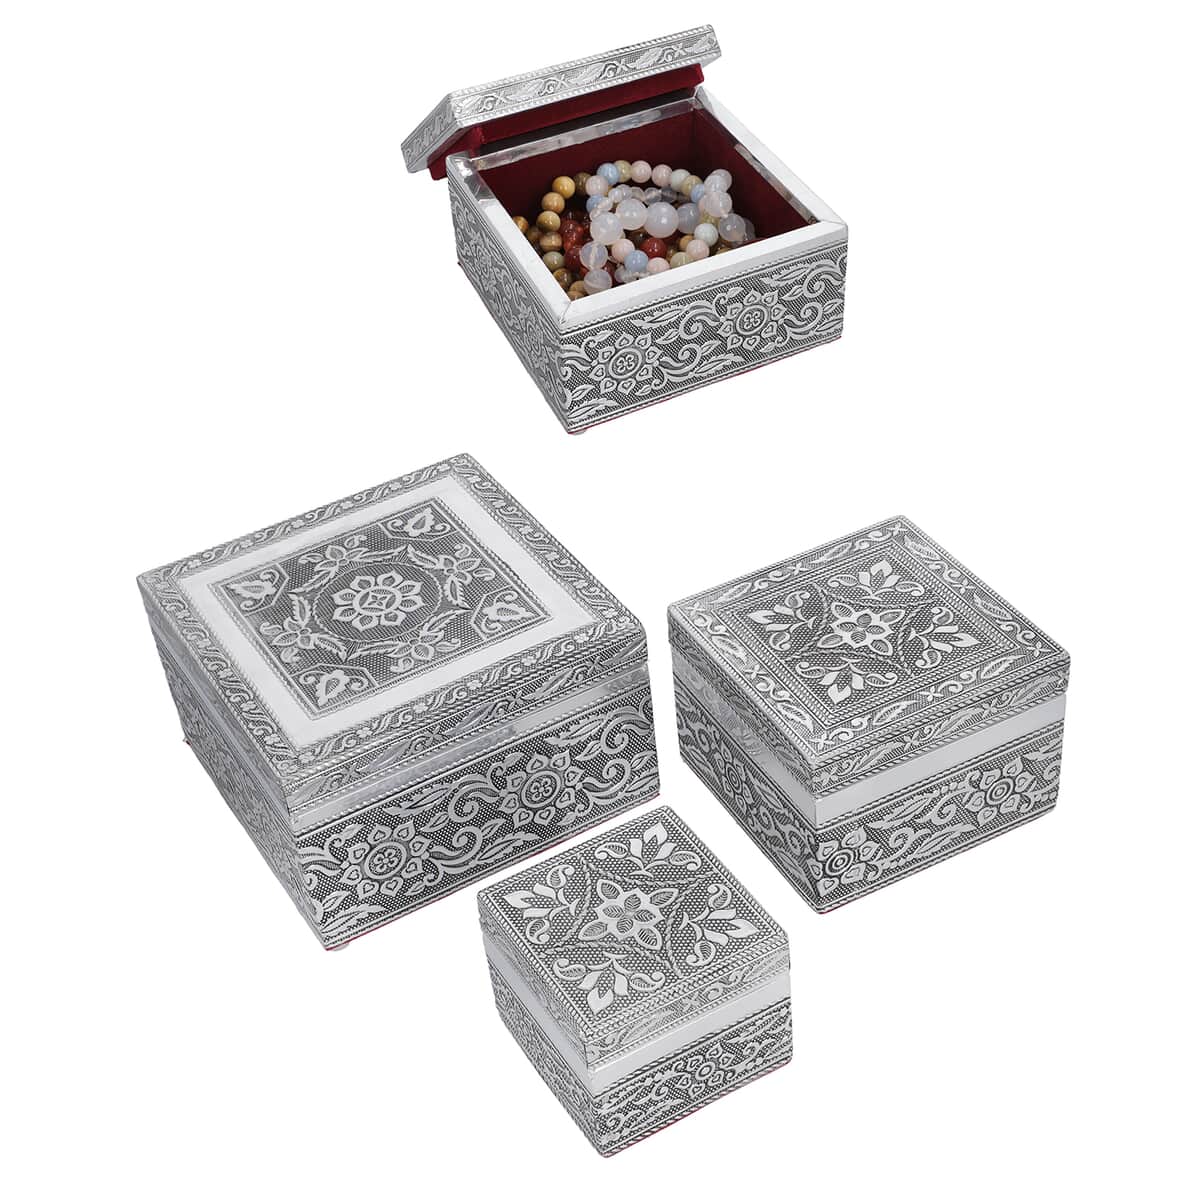 Set of 3 Handcrafted Mandala Embossed Aluminum Oxidized Multi-Purpose Nested Box with Scratch Protection Interior (4.75x4.75x2.5, 3.5x3.5x2.15, 2.5x2.5x1 in) image number 0